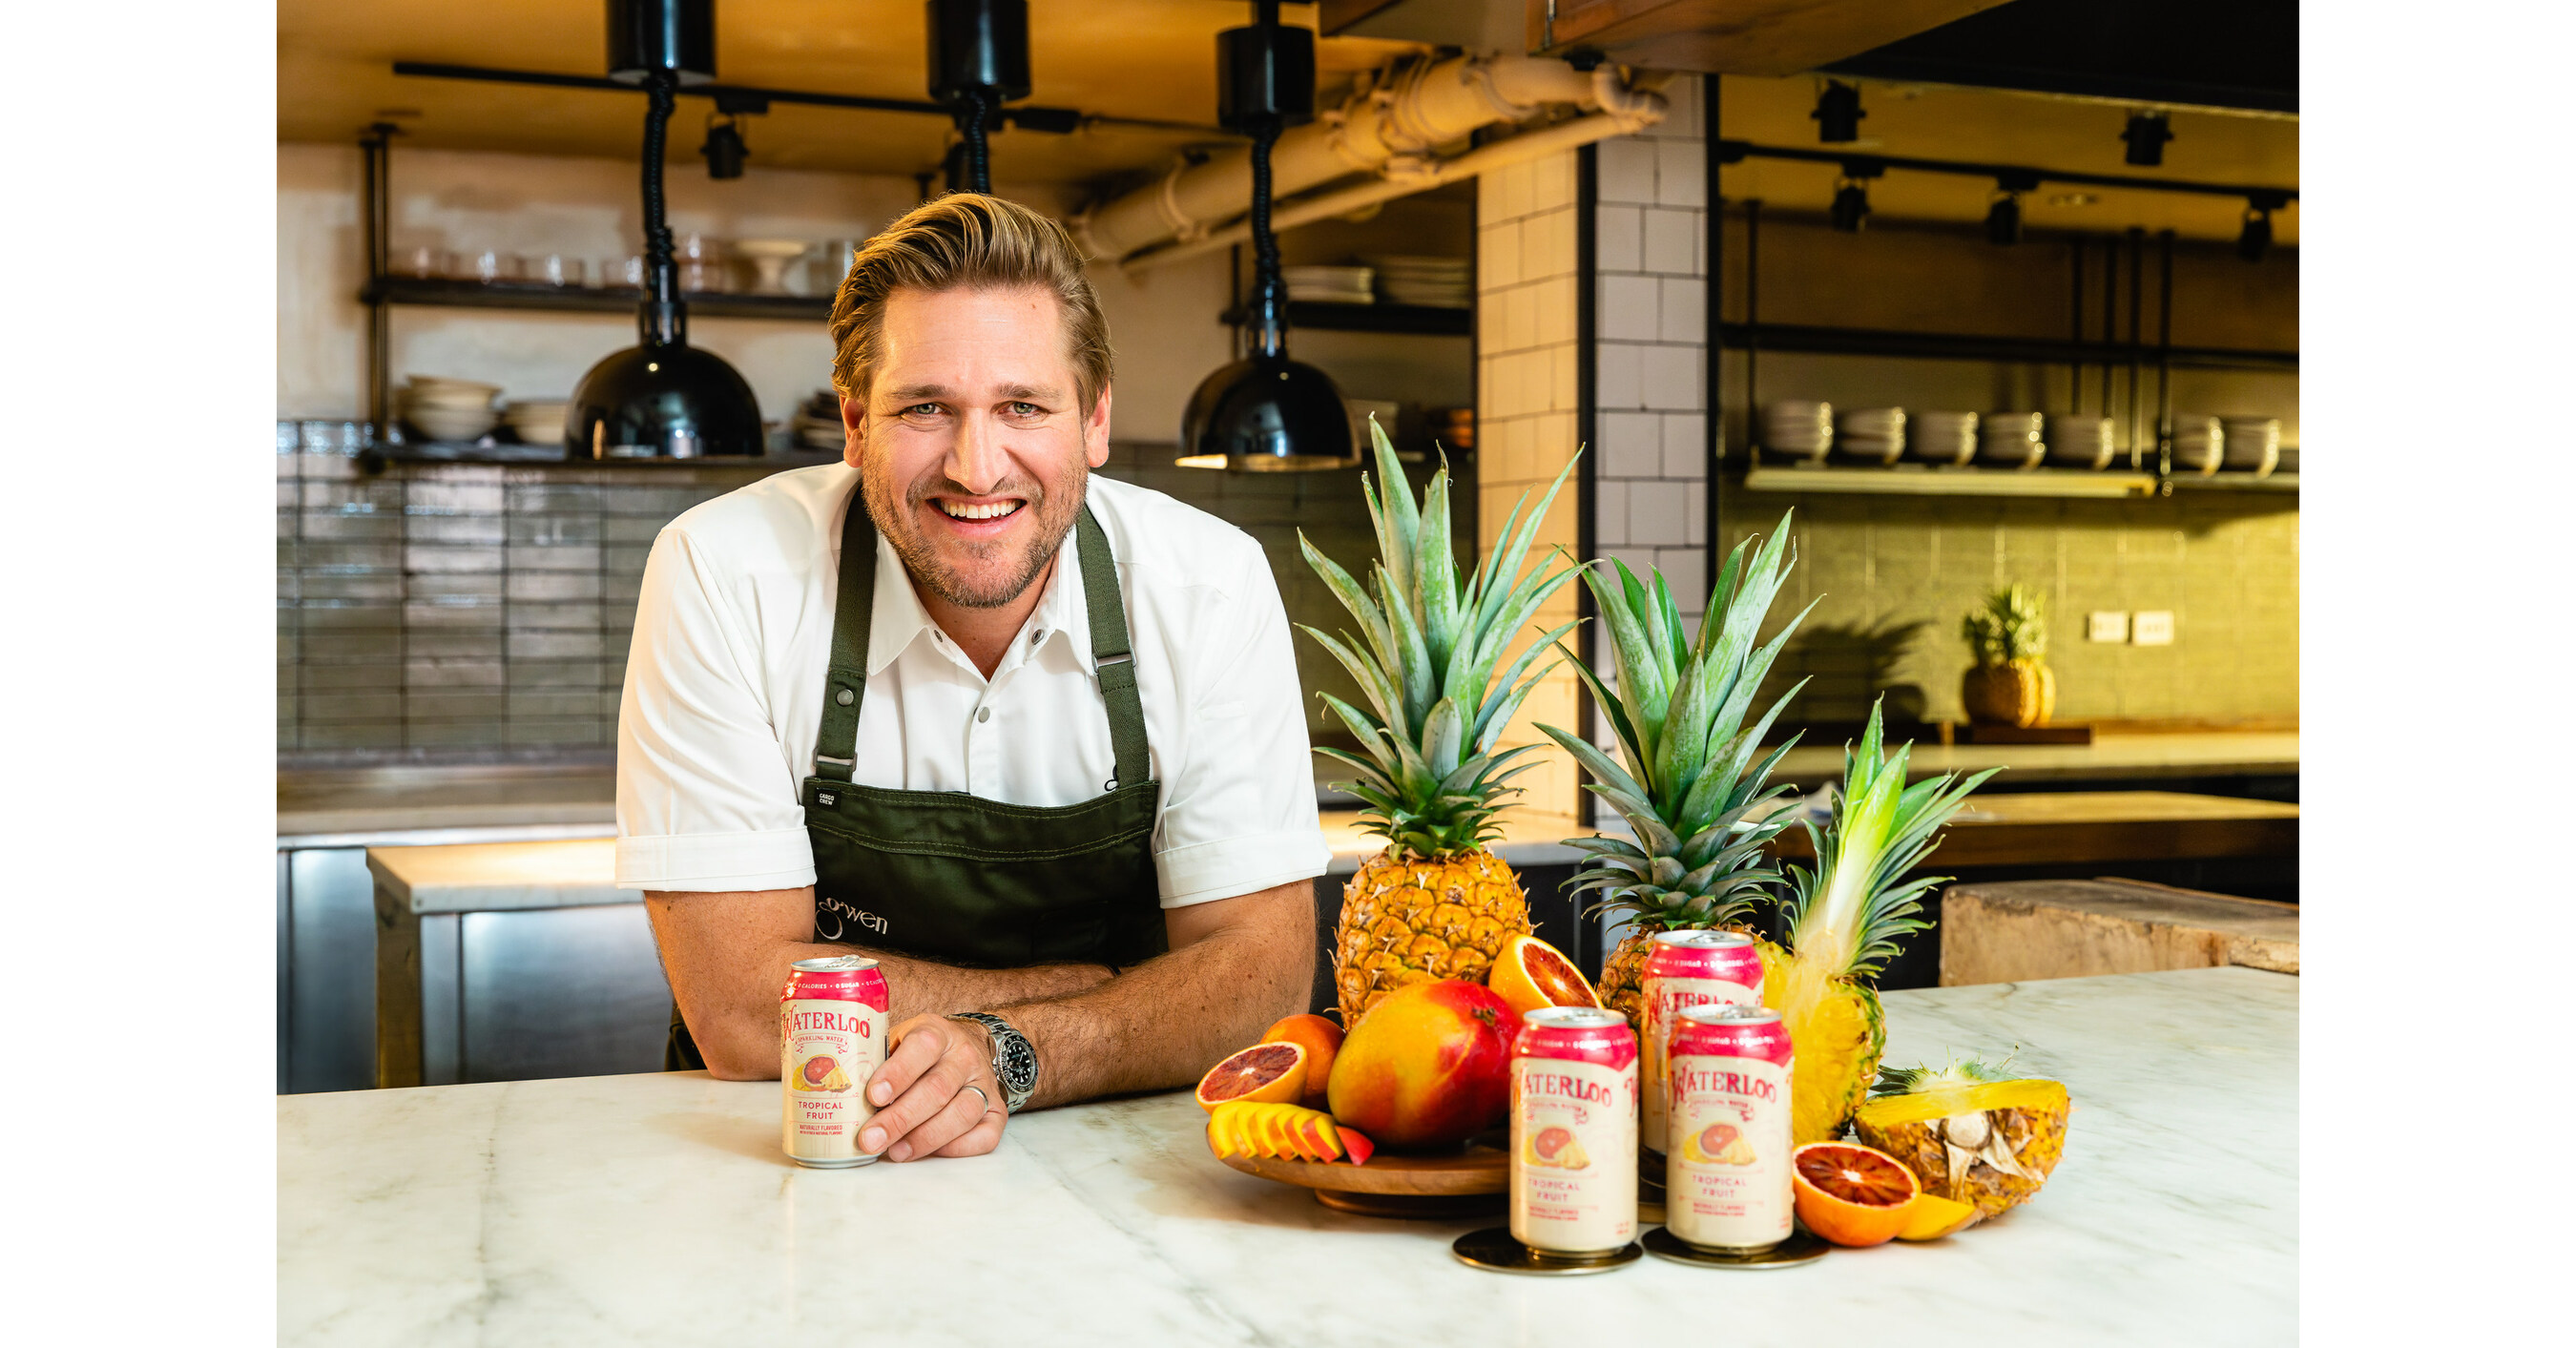 WATERLOO SPARKLING WATER INTRODUCES ALL-NEW TROPICAL FRUIT FLAVOR AND TEAMS UP WITH MICHELIN-STARRED CHEF CURTIS STONE TO CELEBRATE LAUNCH